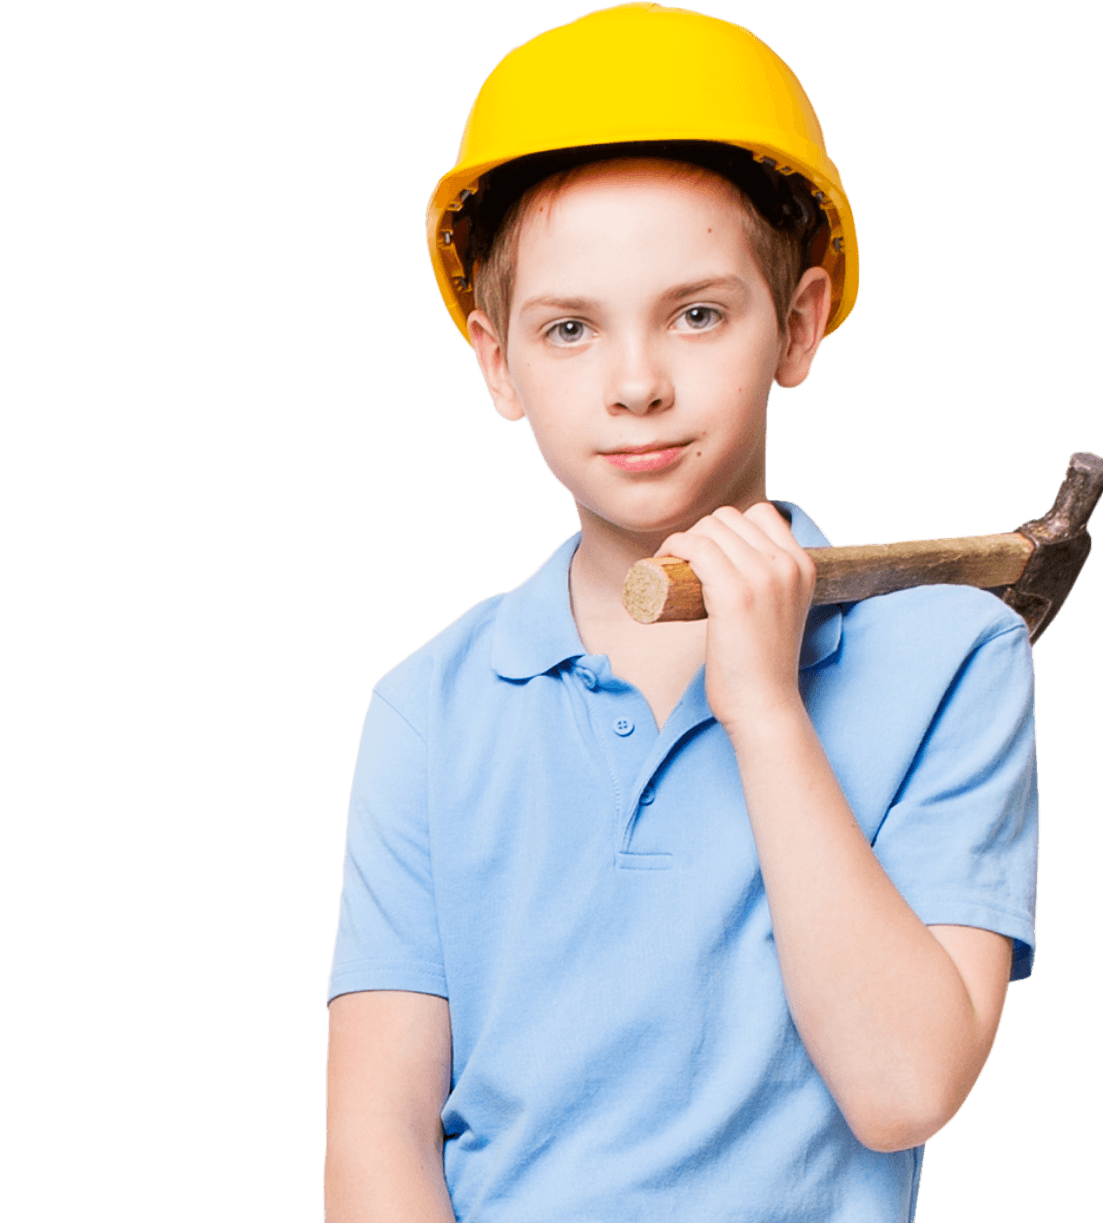 A boy holds a hammer over his shoulder with a construction hat on